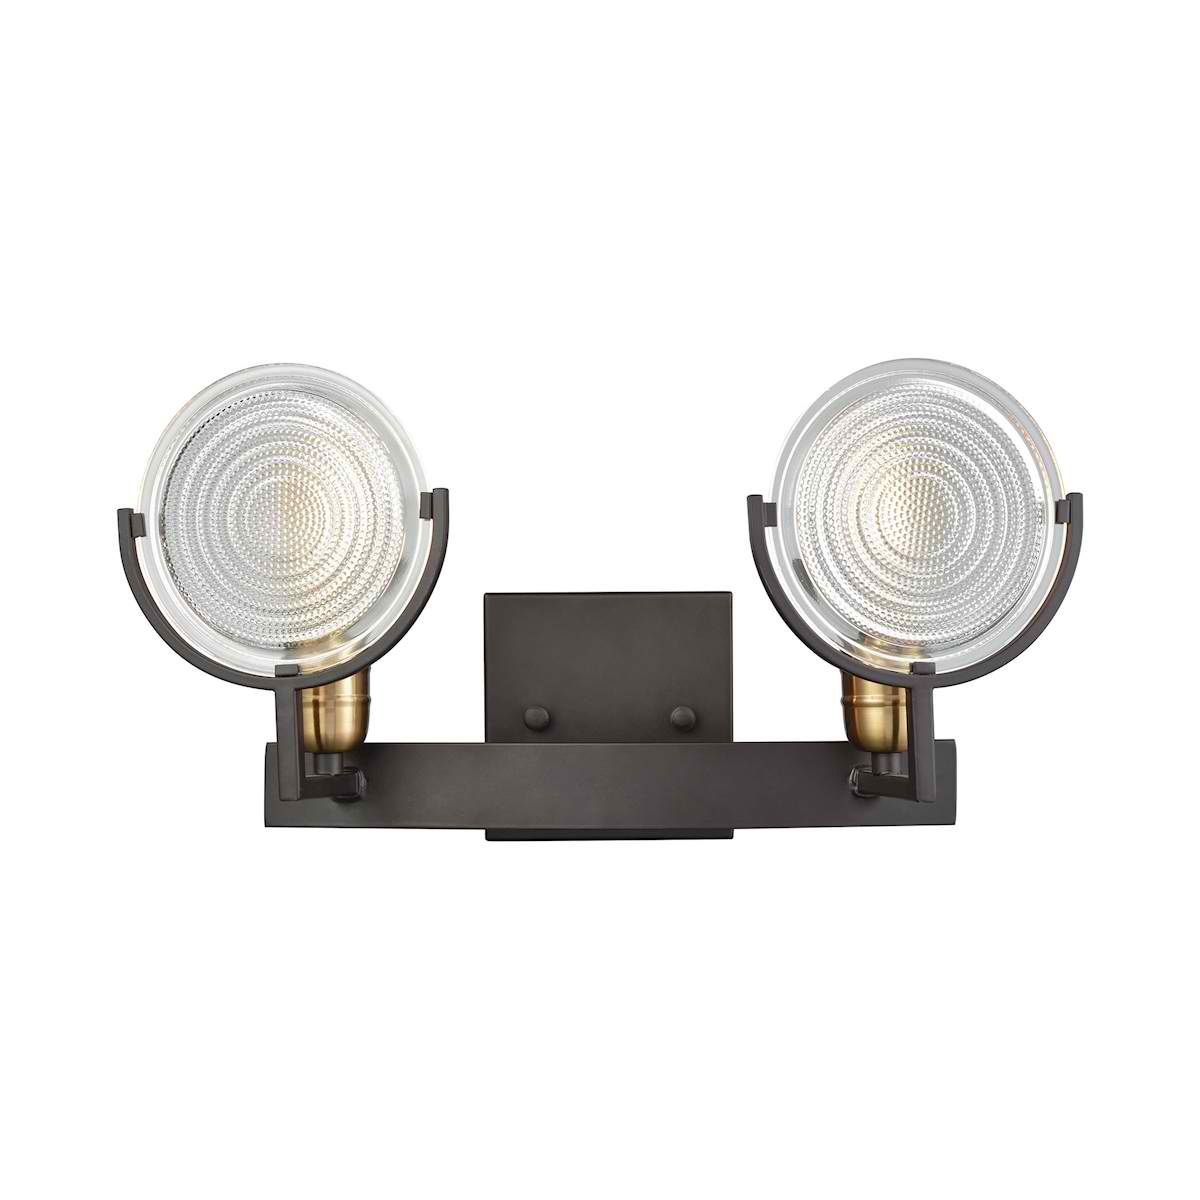 Ocular 2 Light Vanity in Oil Rubbed Bronze with Satin Brass Accents and Clear Railroad Light Glass